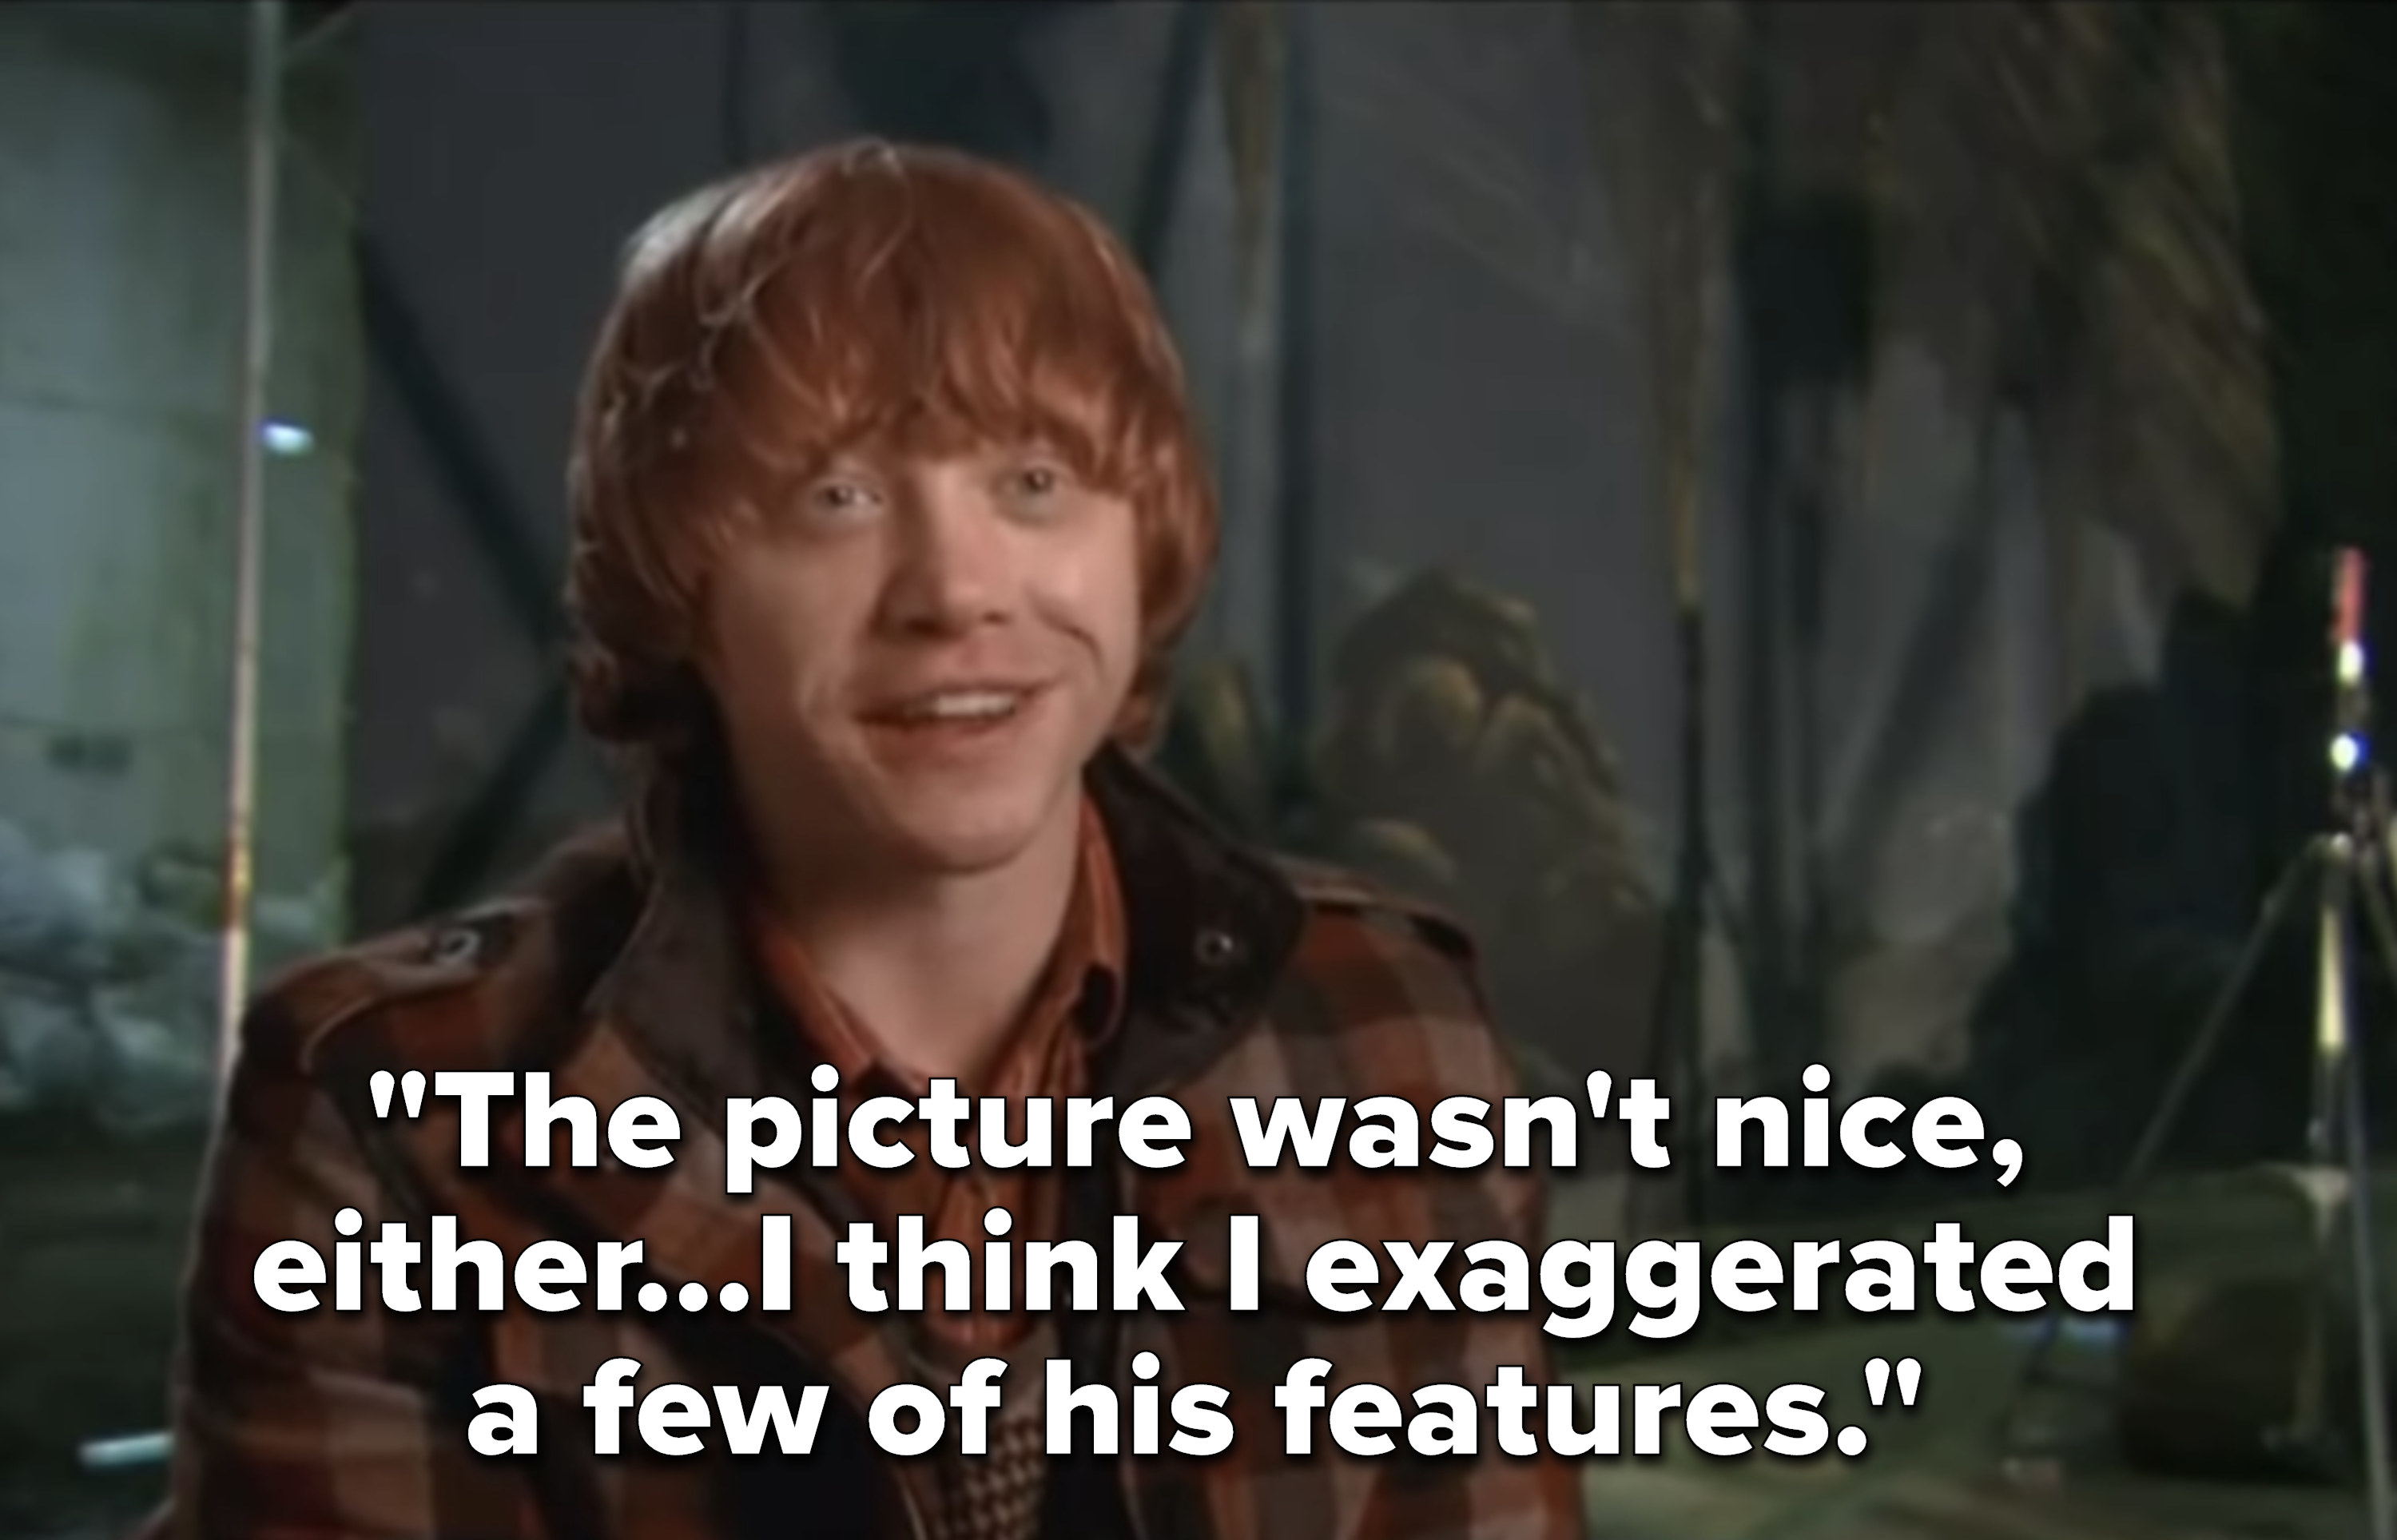 Rupert saying &quot;The picture wasn&#x27;t nice, either; I think I exaggerated a few of his features&quot;